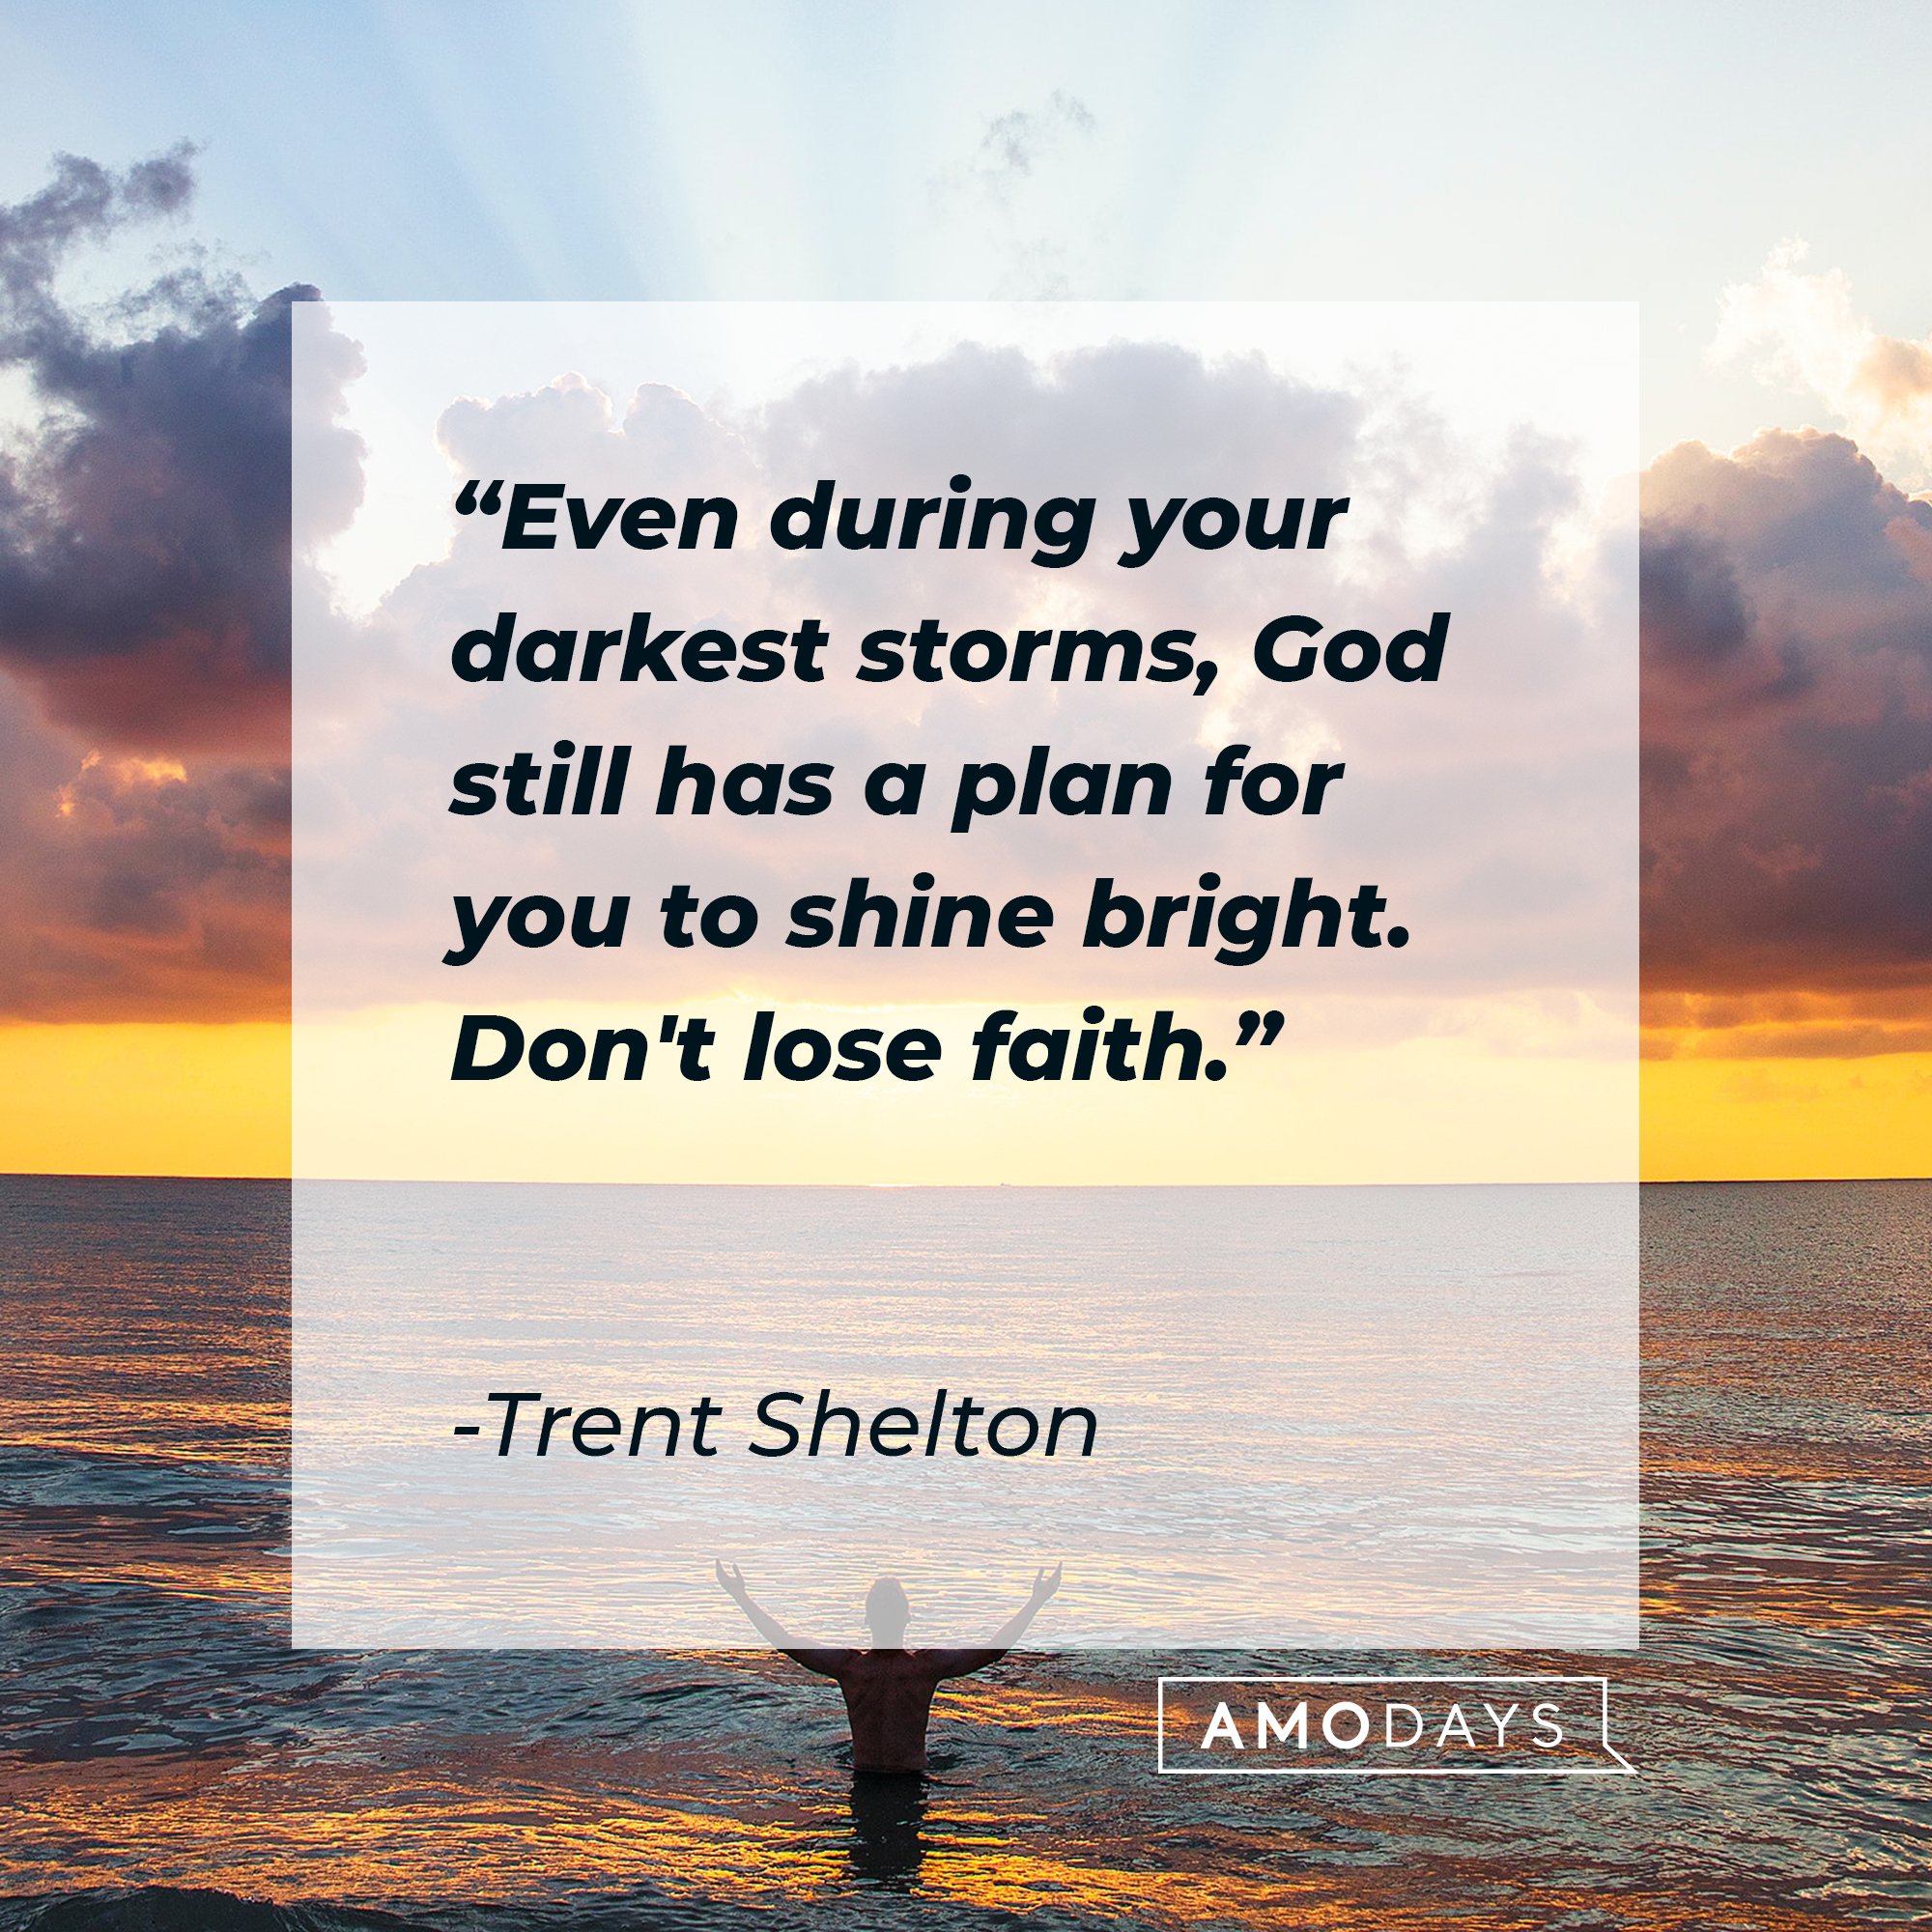 Trent Shelton's quote: "Even during your darkest storms, God still has a plan for you to shine bright. Don't lose faith." | Image: AmoDays